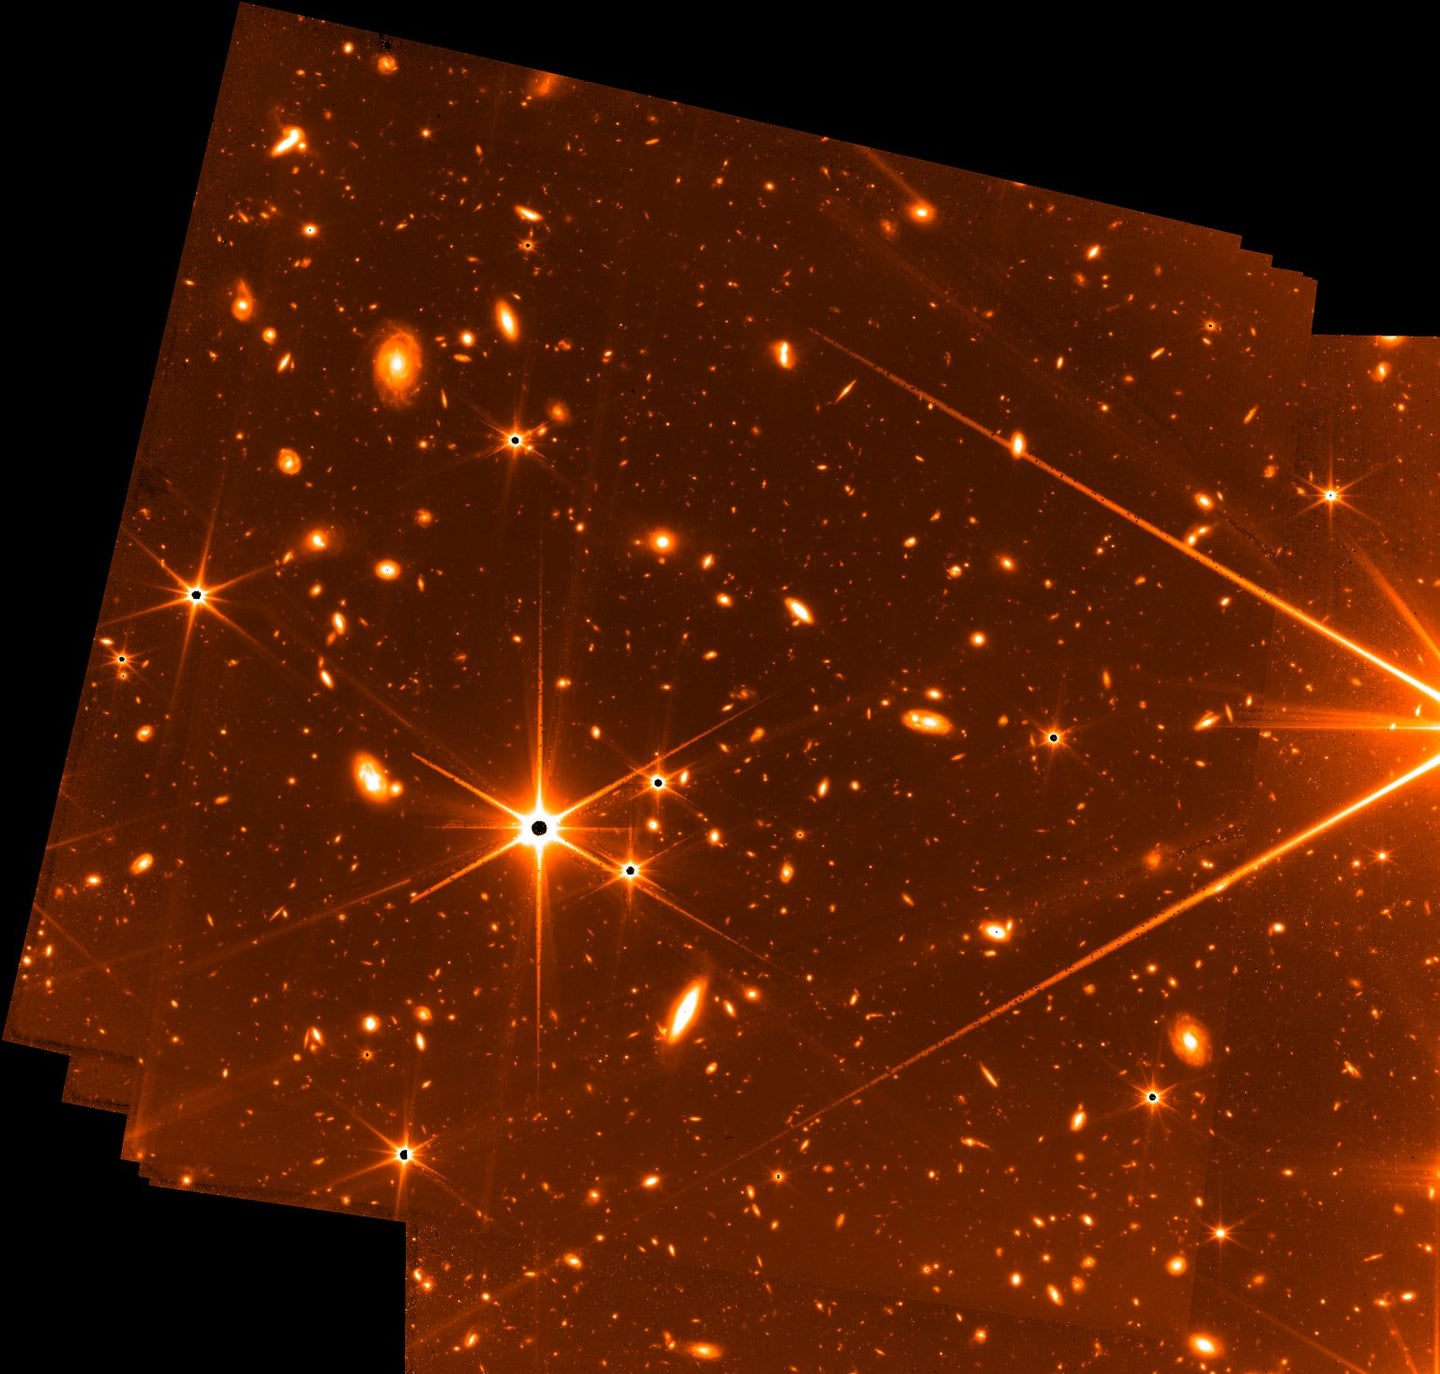 Test image from James Webb Space Telescope.